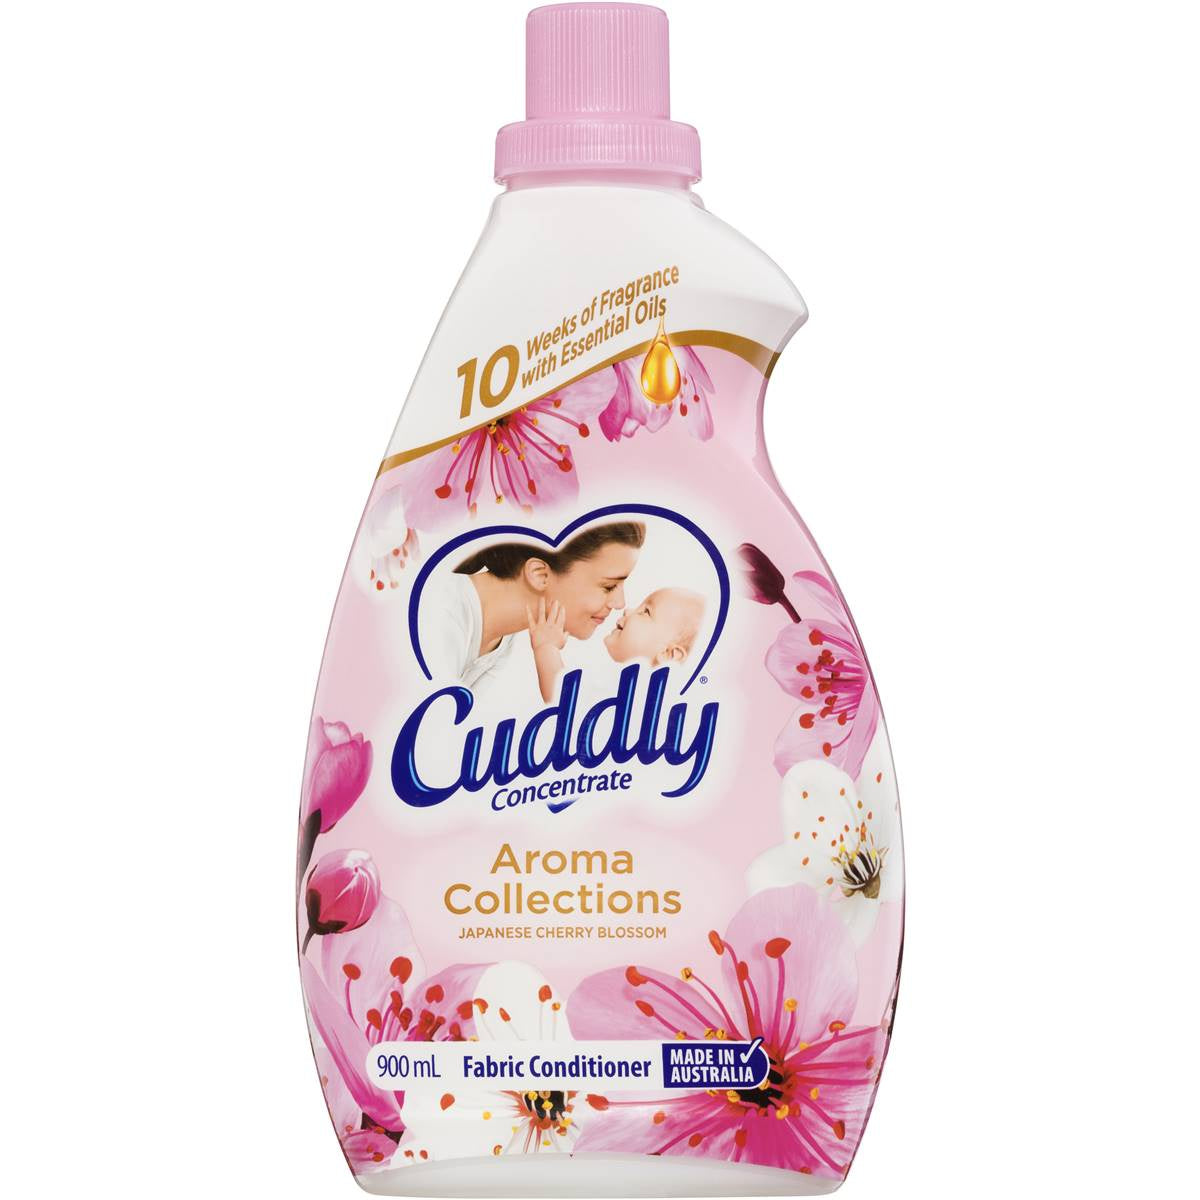 Cuddly Concentrate Fabric Conditioner Japanese Cherry Blossom 900ml